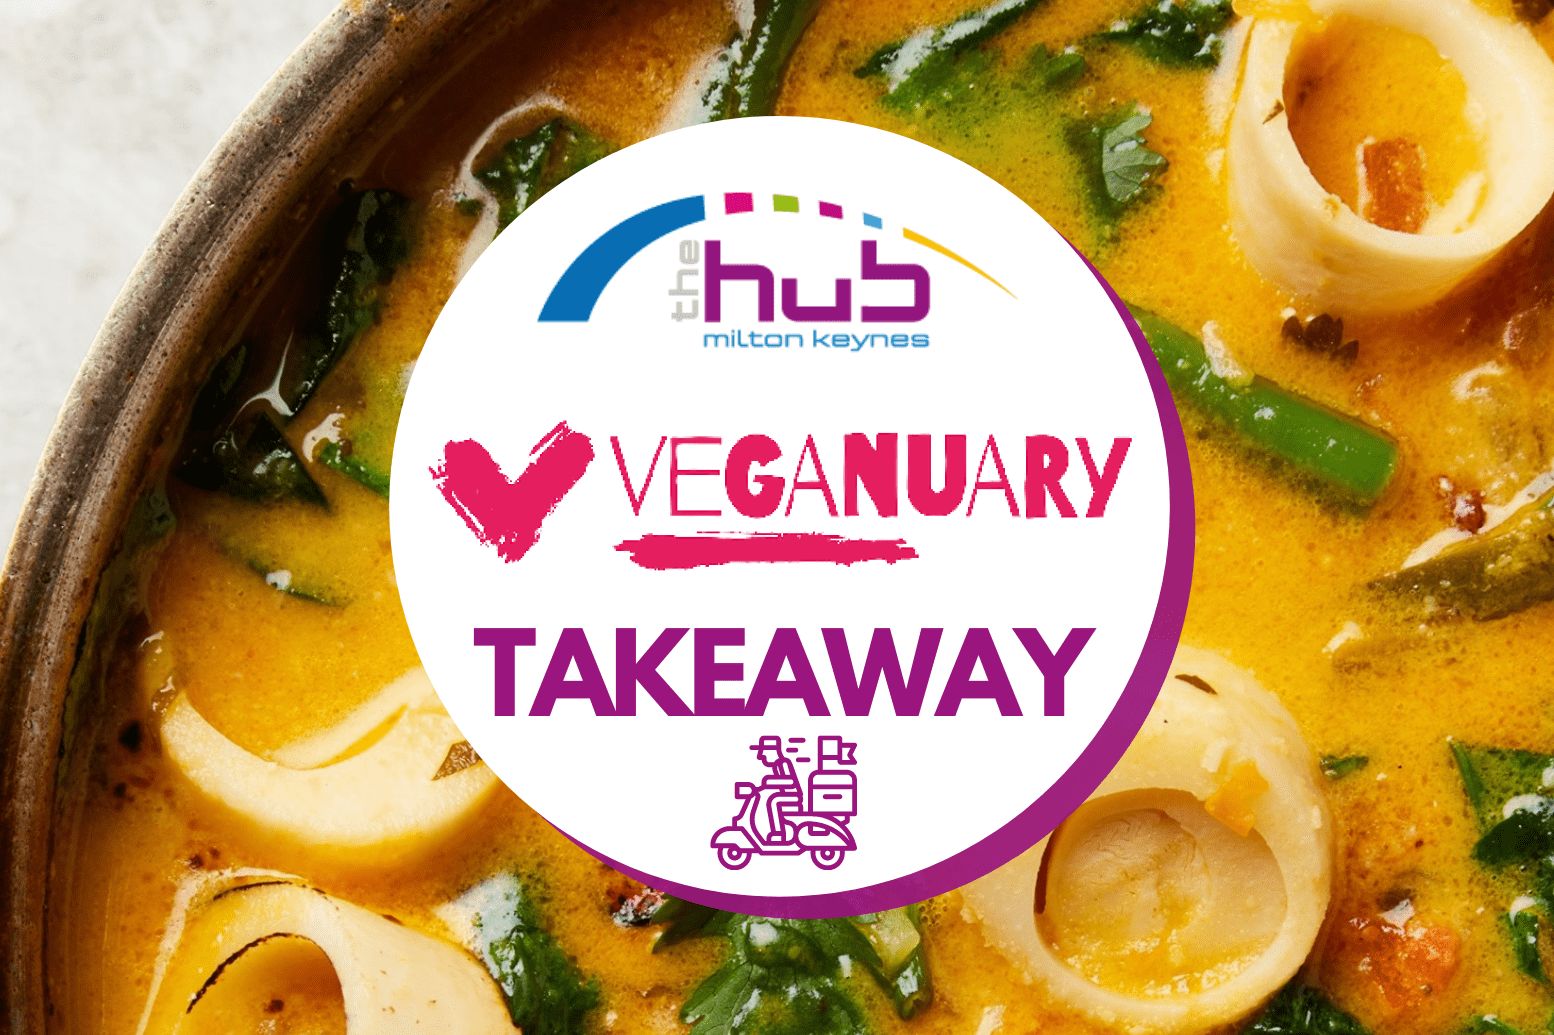 Veganuary has arrived at The Hub